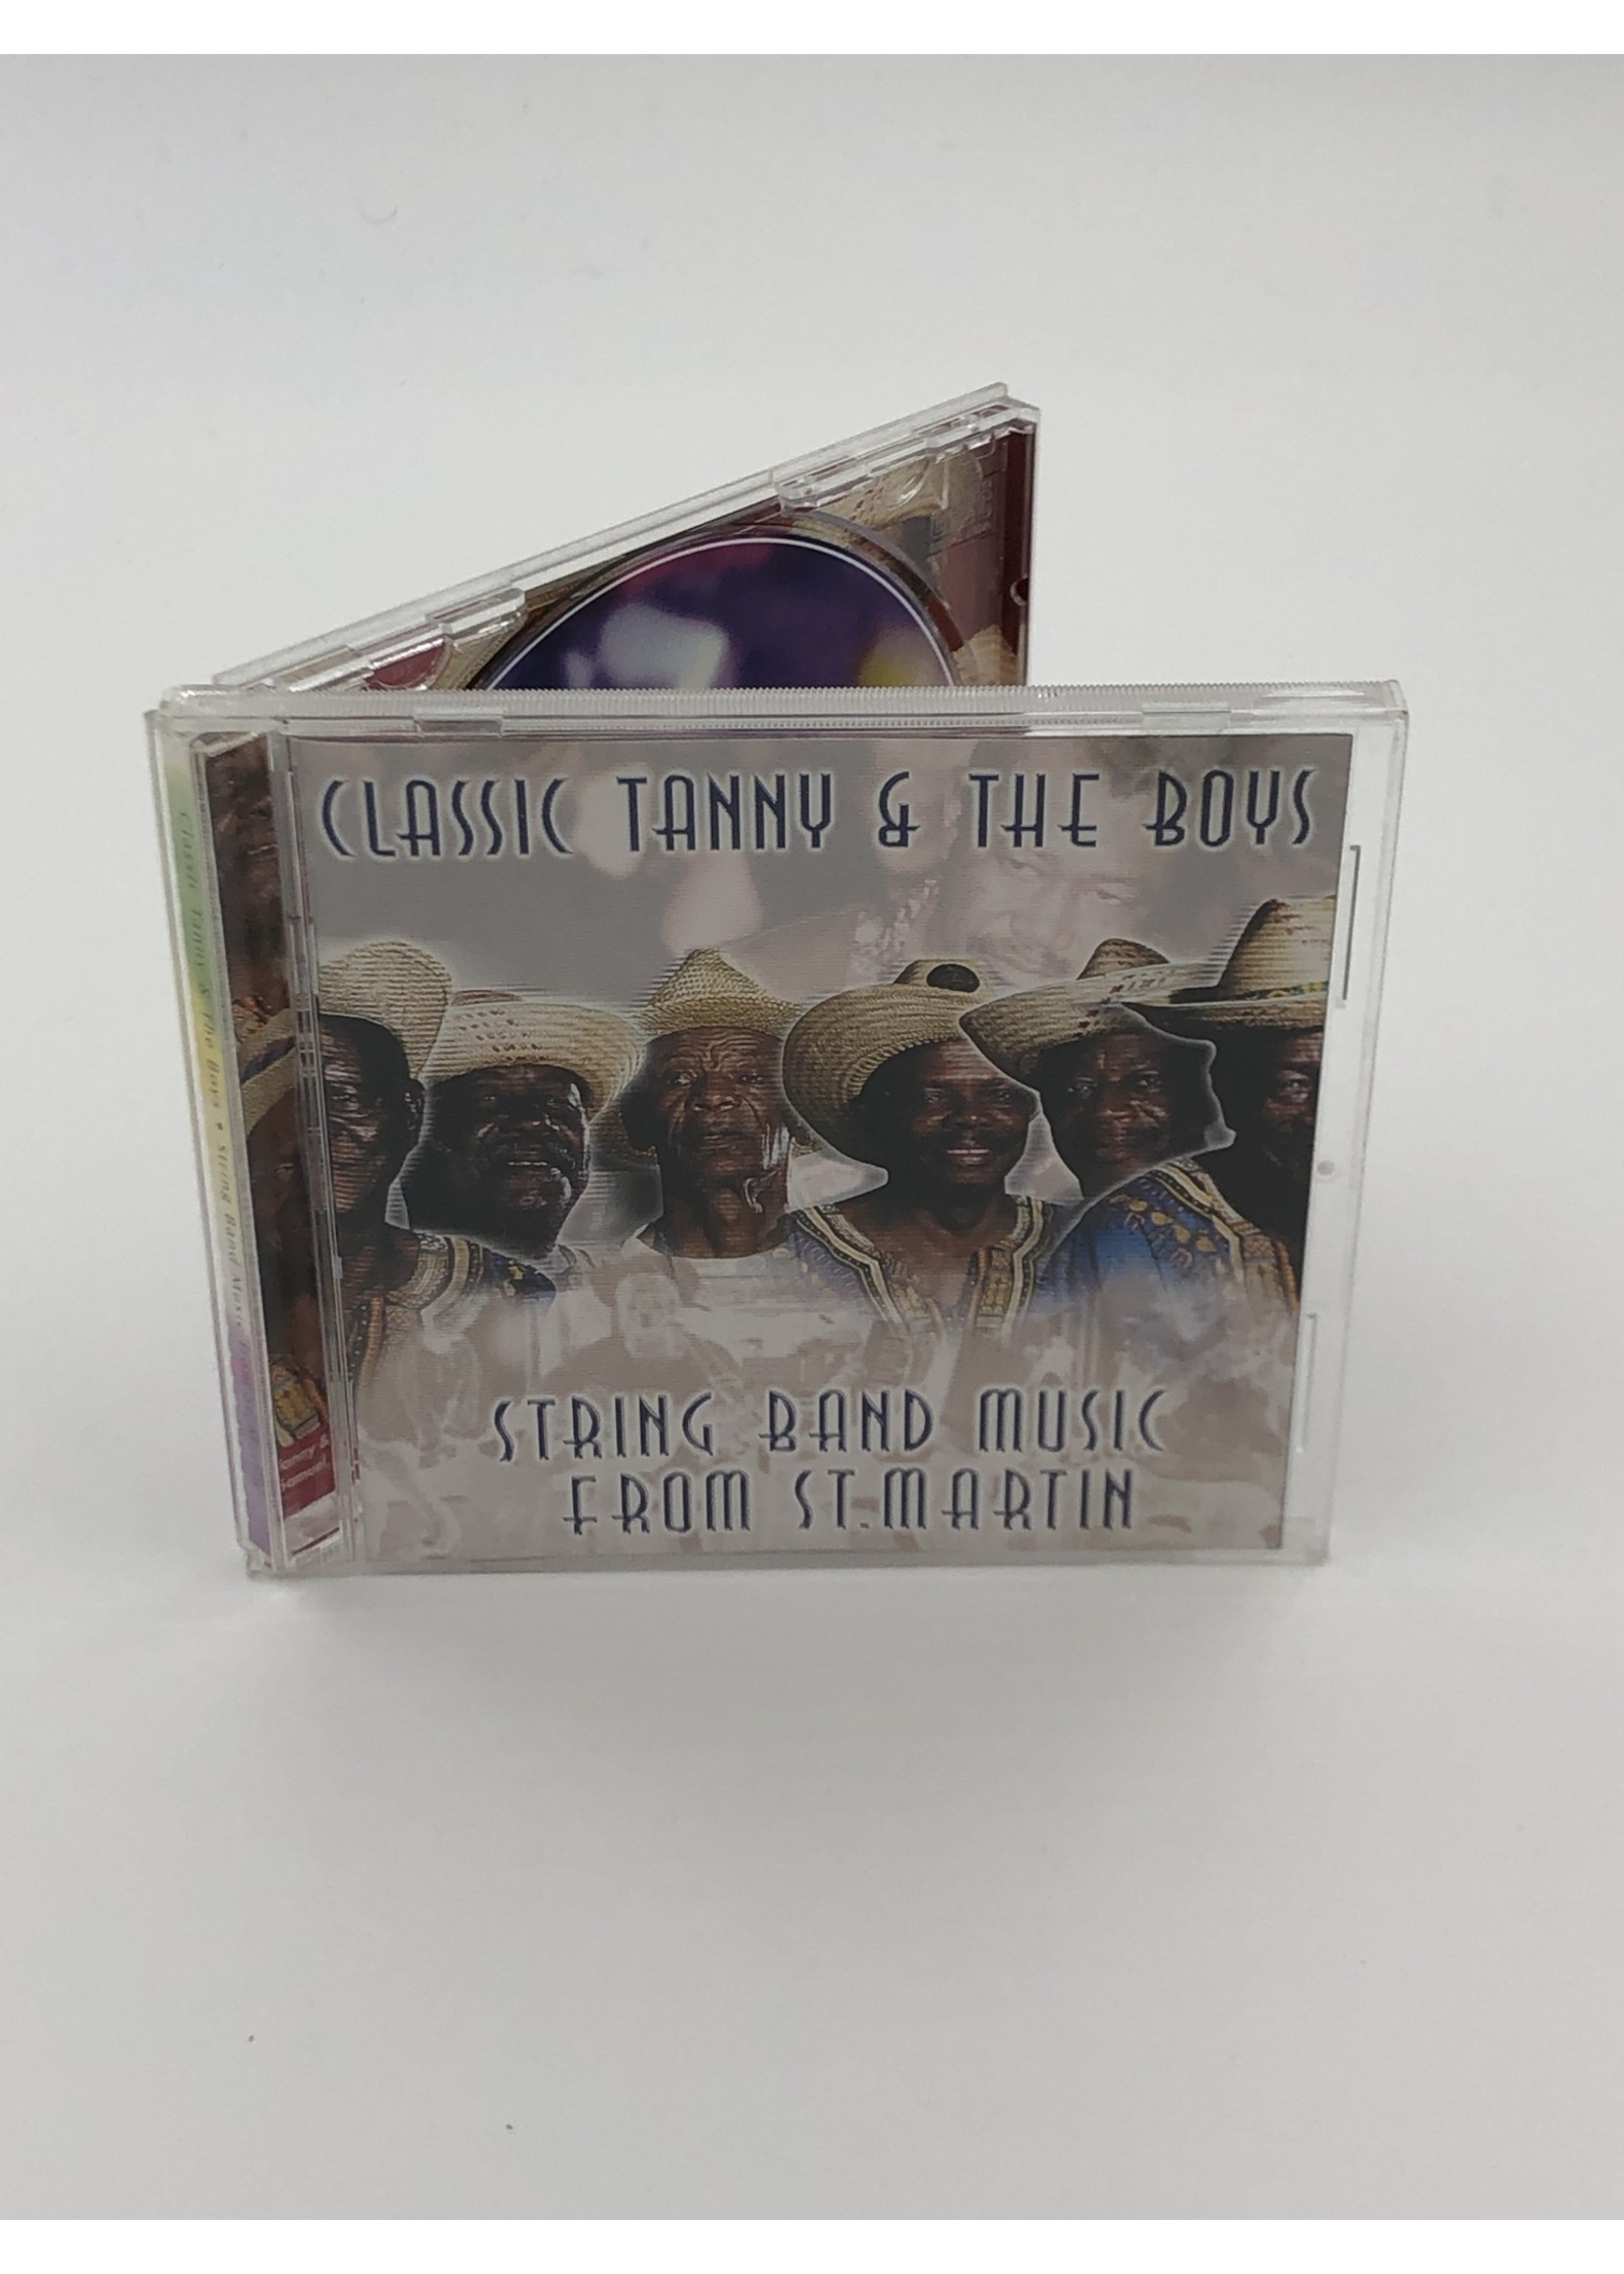 CD Classic Tony & The Boys: String Band music from St. Martin CD